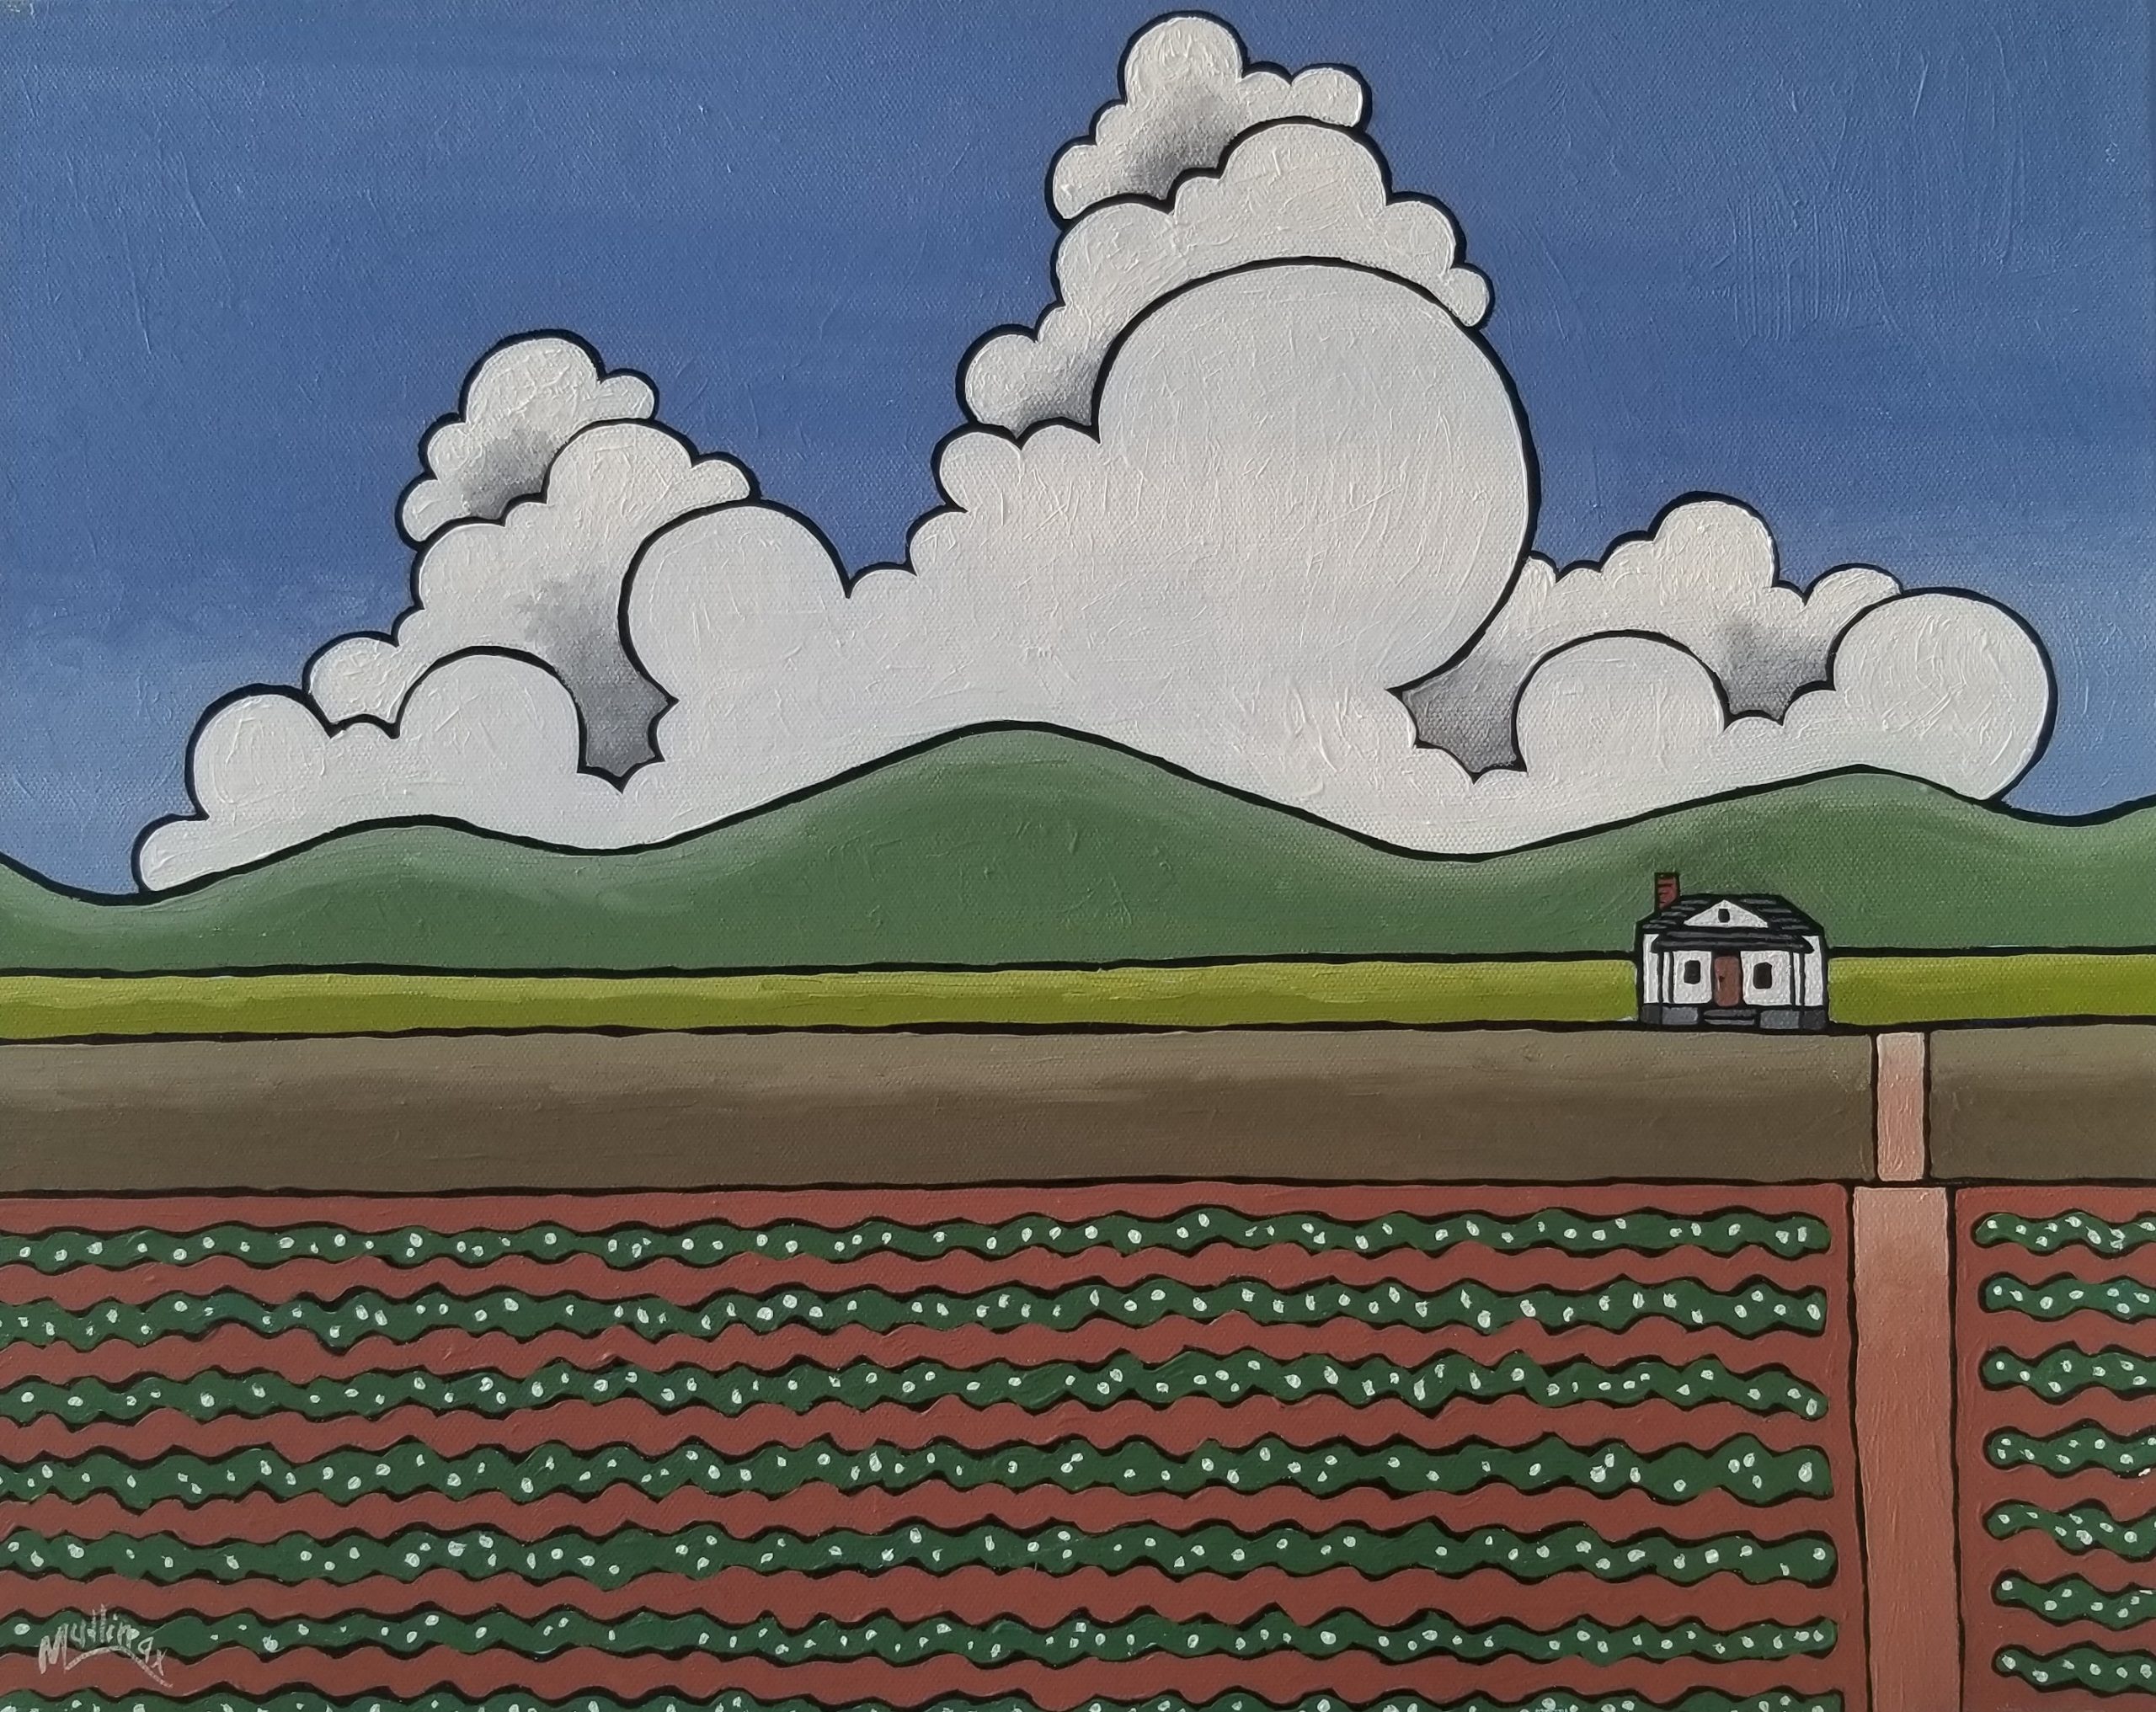 Clouds and Cotton Fields | Painting by Kent Mullinax of Cartersville, Georgia